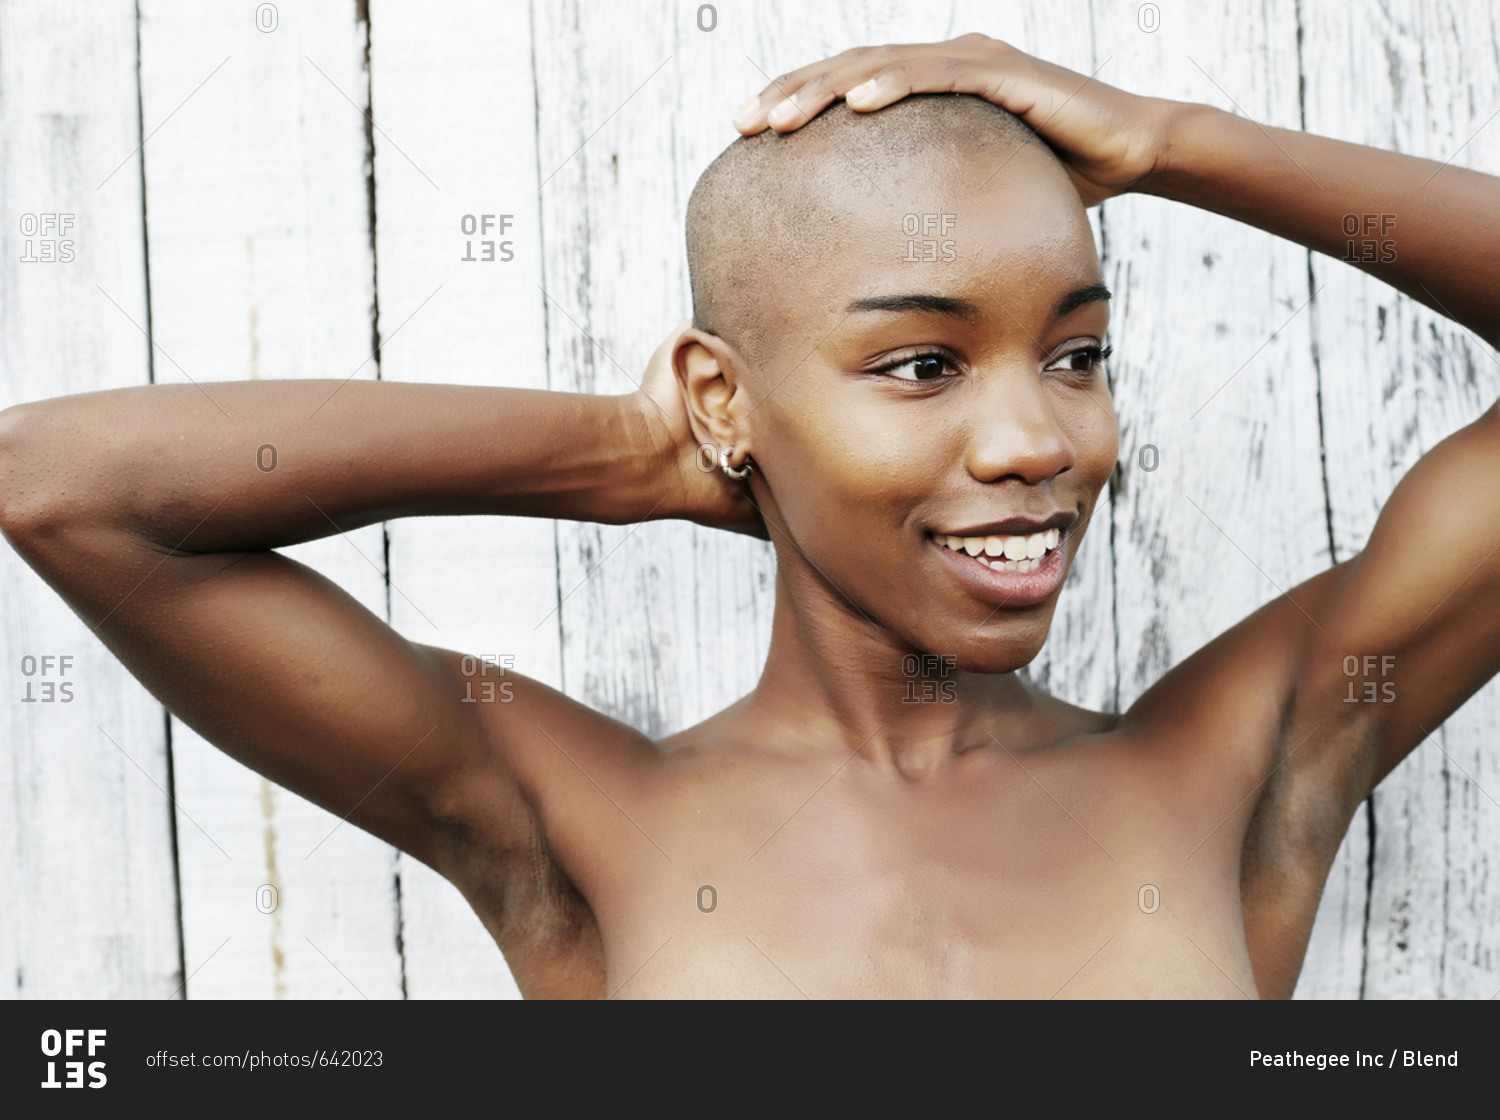 brandy spring recommends Nude Bald Black Women